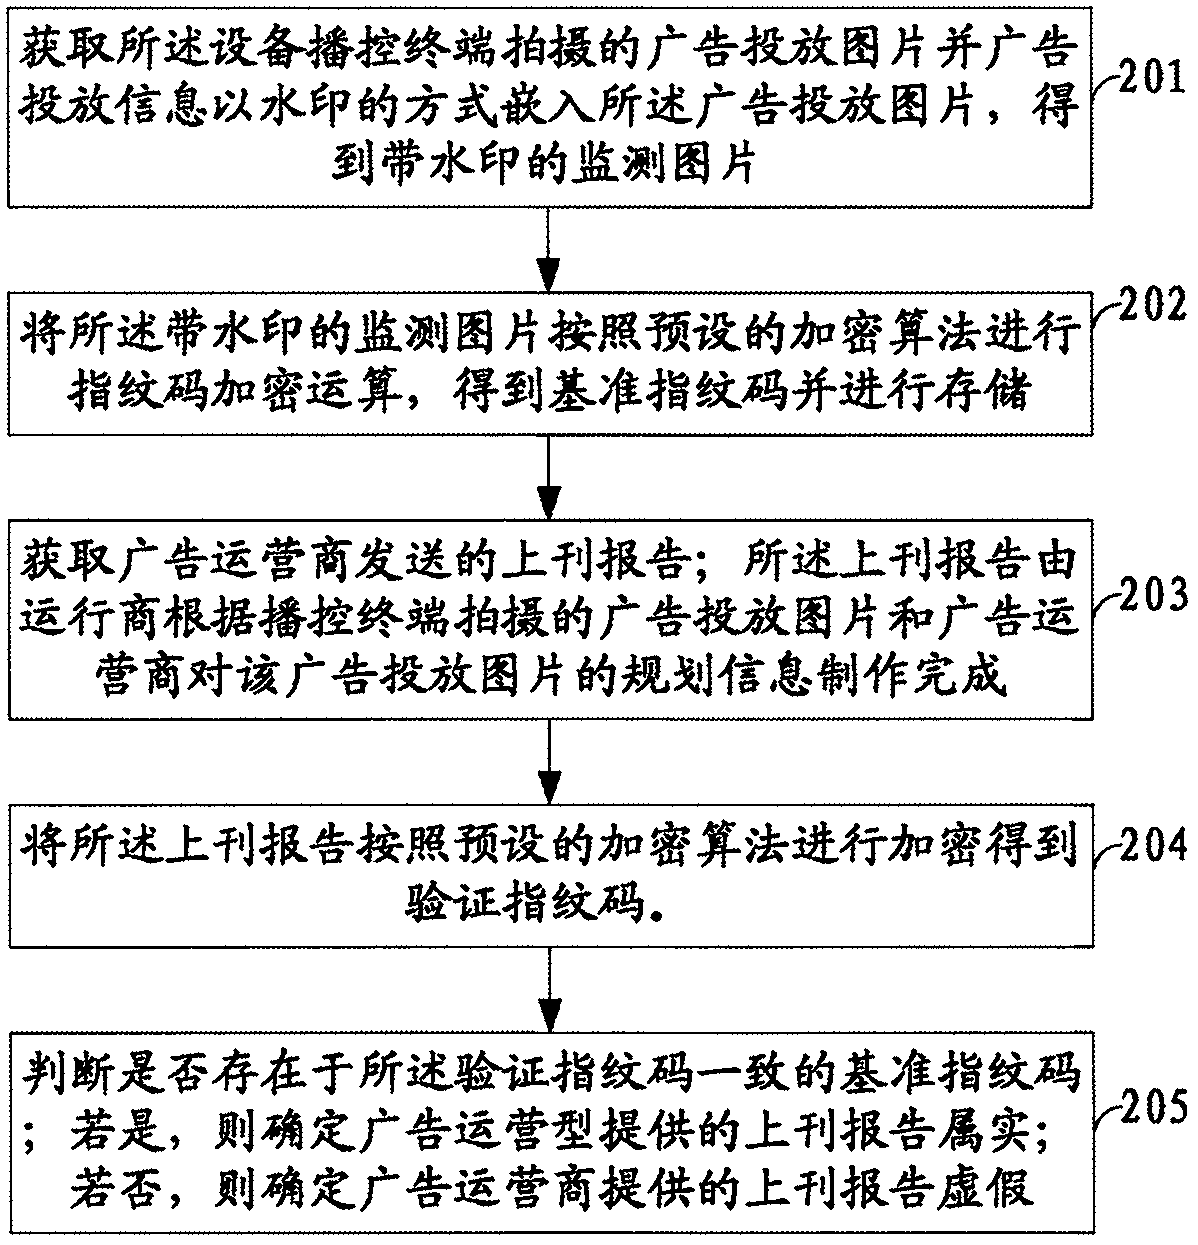 Advertisement media monitoring system and method